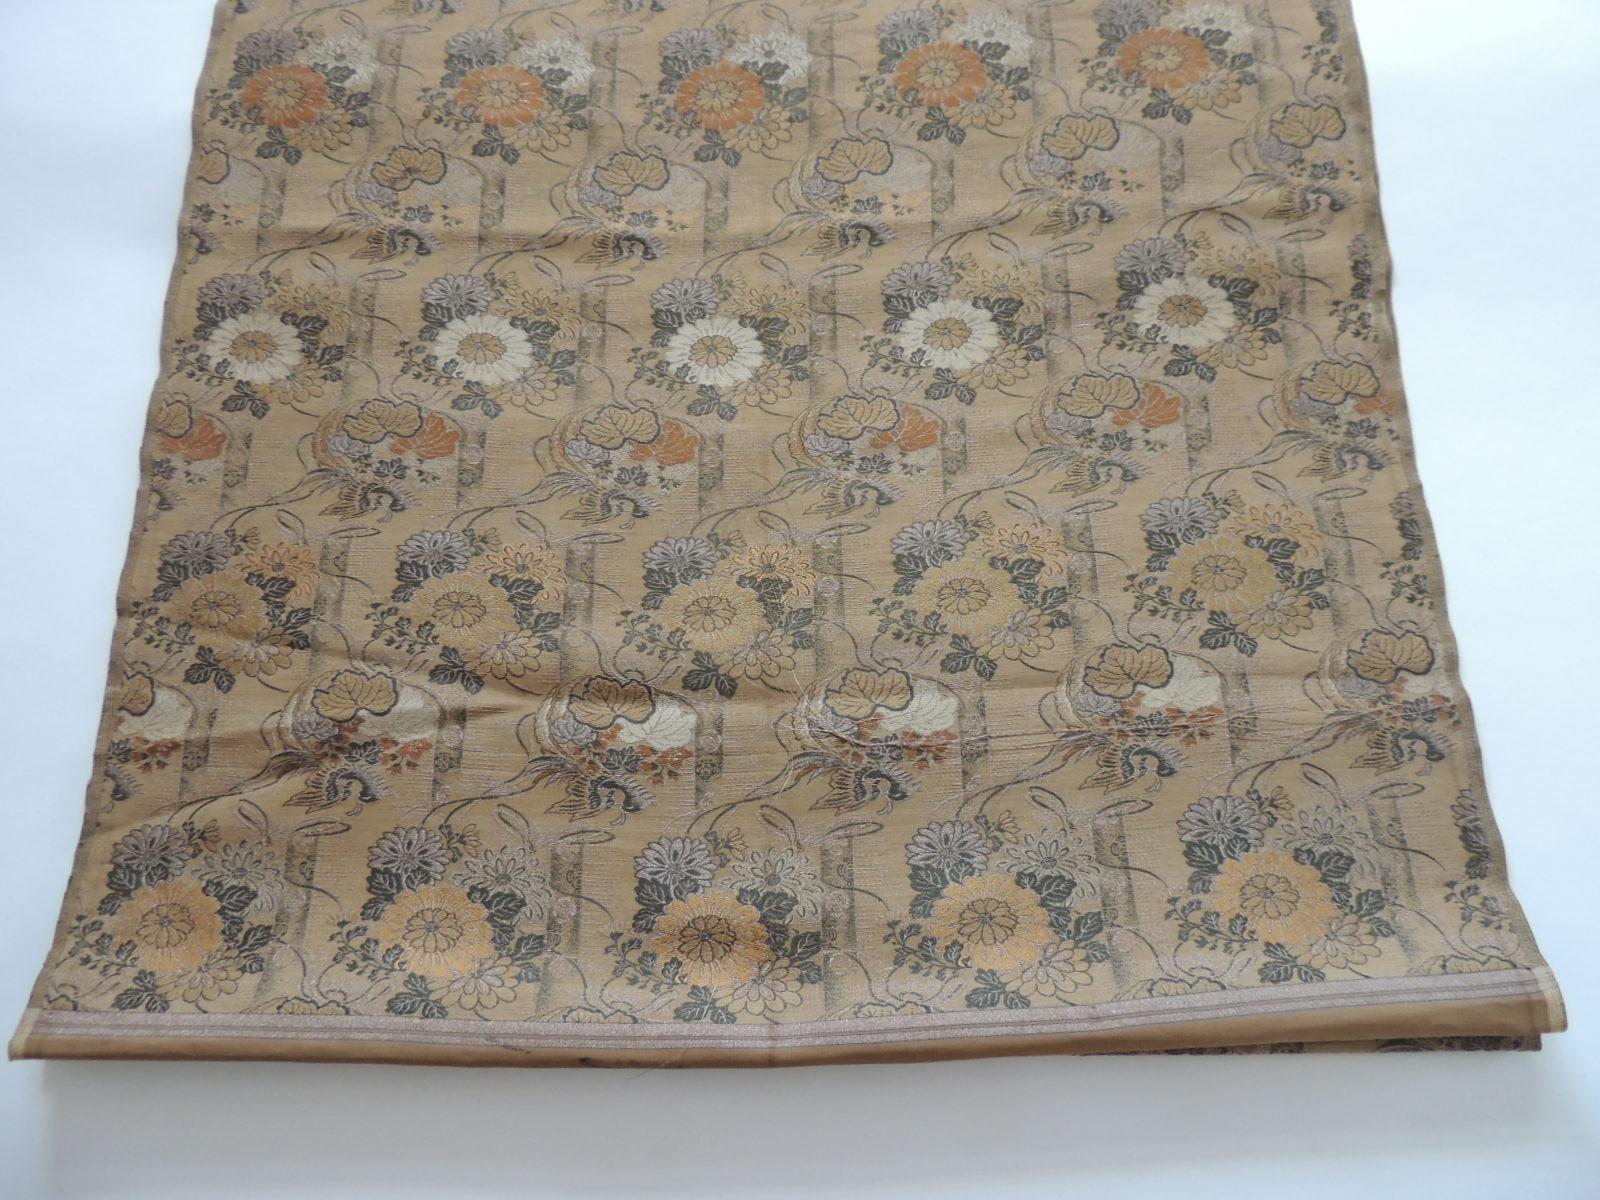 Antique golden and green woven silk obi textile.
Woven textile with silk and metallic threads, depicting chrysanthemum and birds.
Ideal for pillows, upholstery or shades.
Size: 26